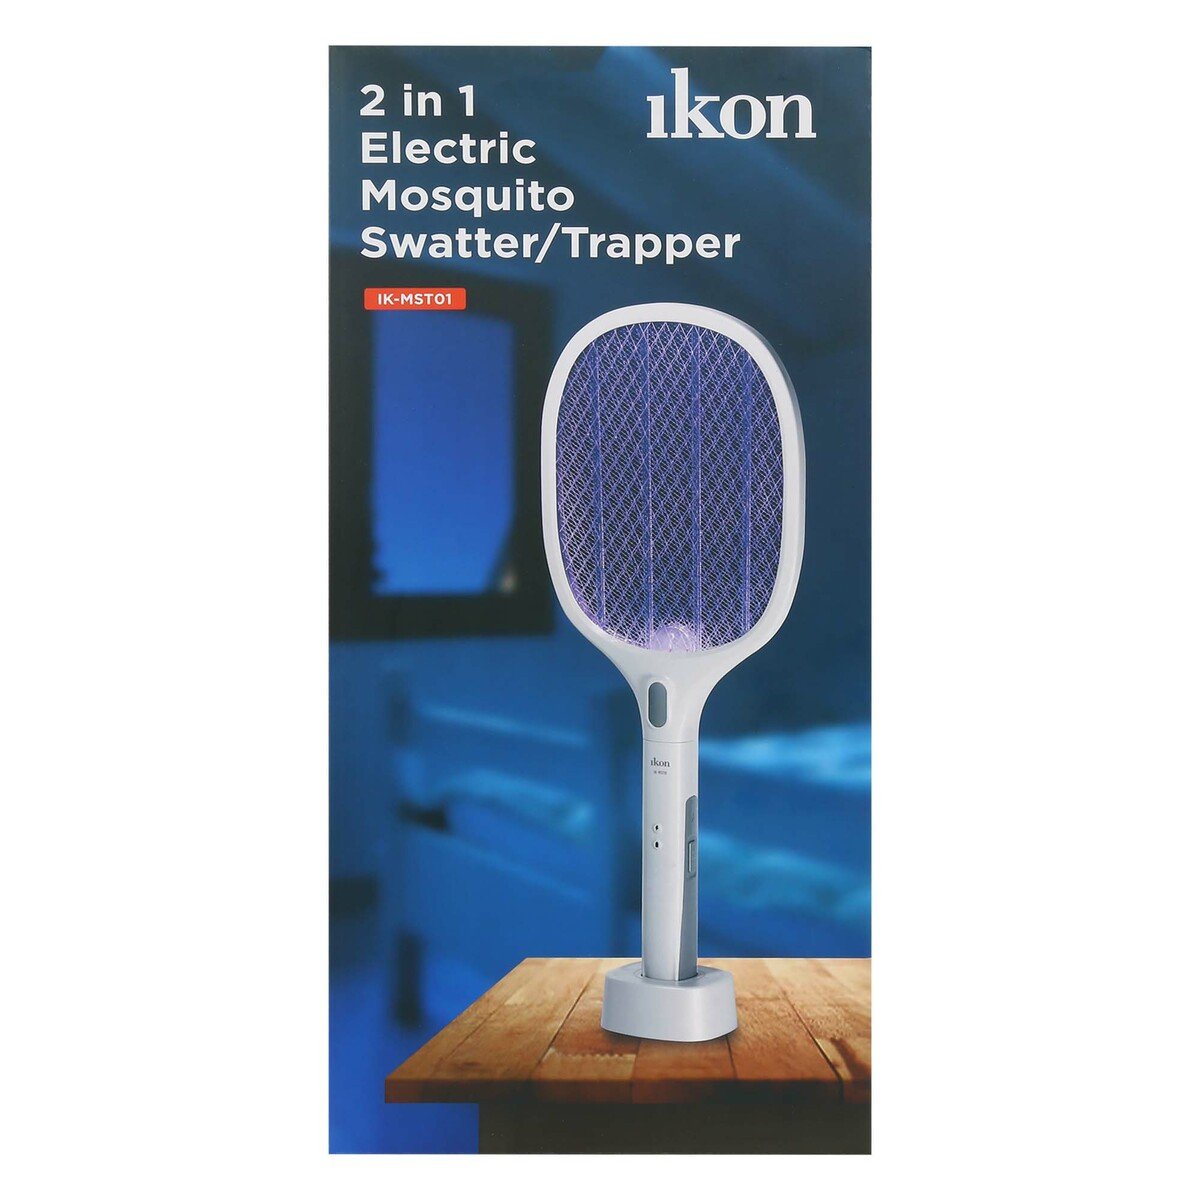 Ikon 2 in 1 Electric Mosquito Trapper IK-MST01